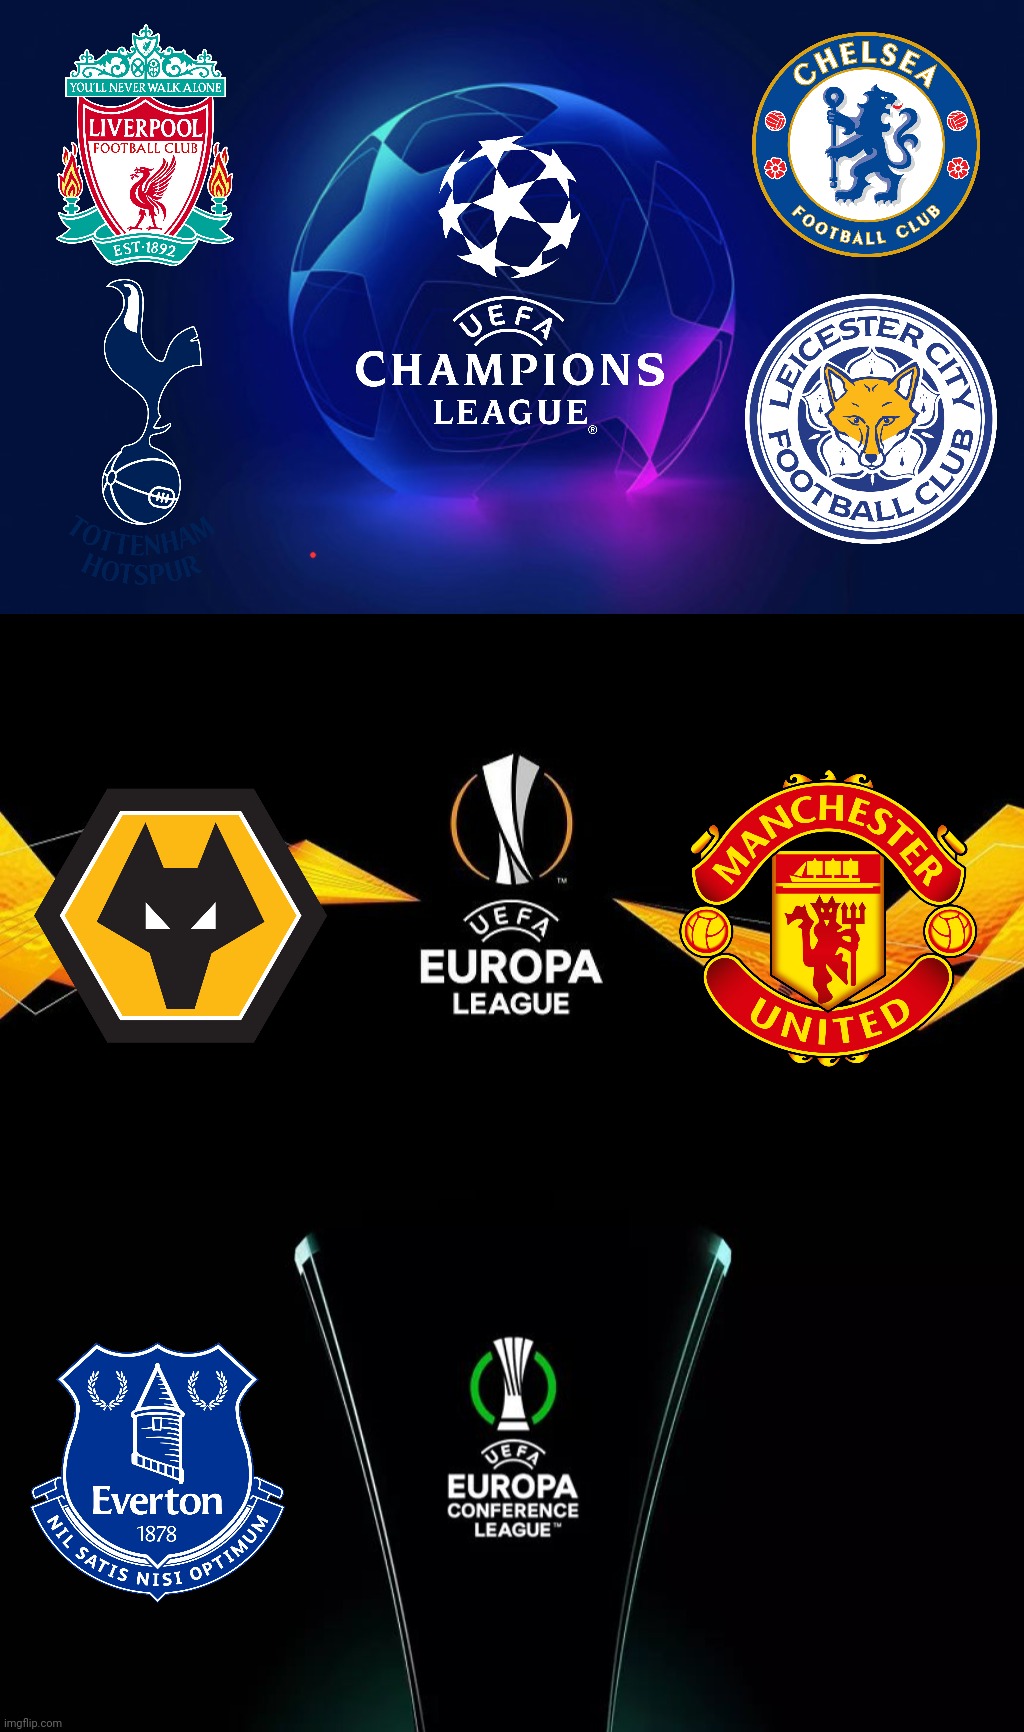 Premier League Teams in European Competitions | image tagged in memes,football,soccer,uk | made w/ Imgflip meme maker